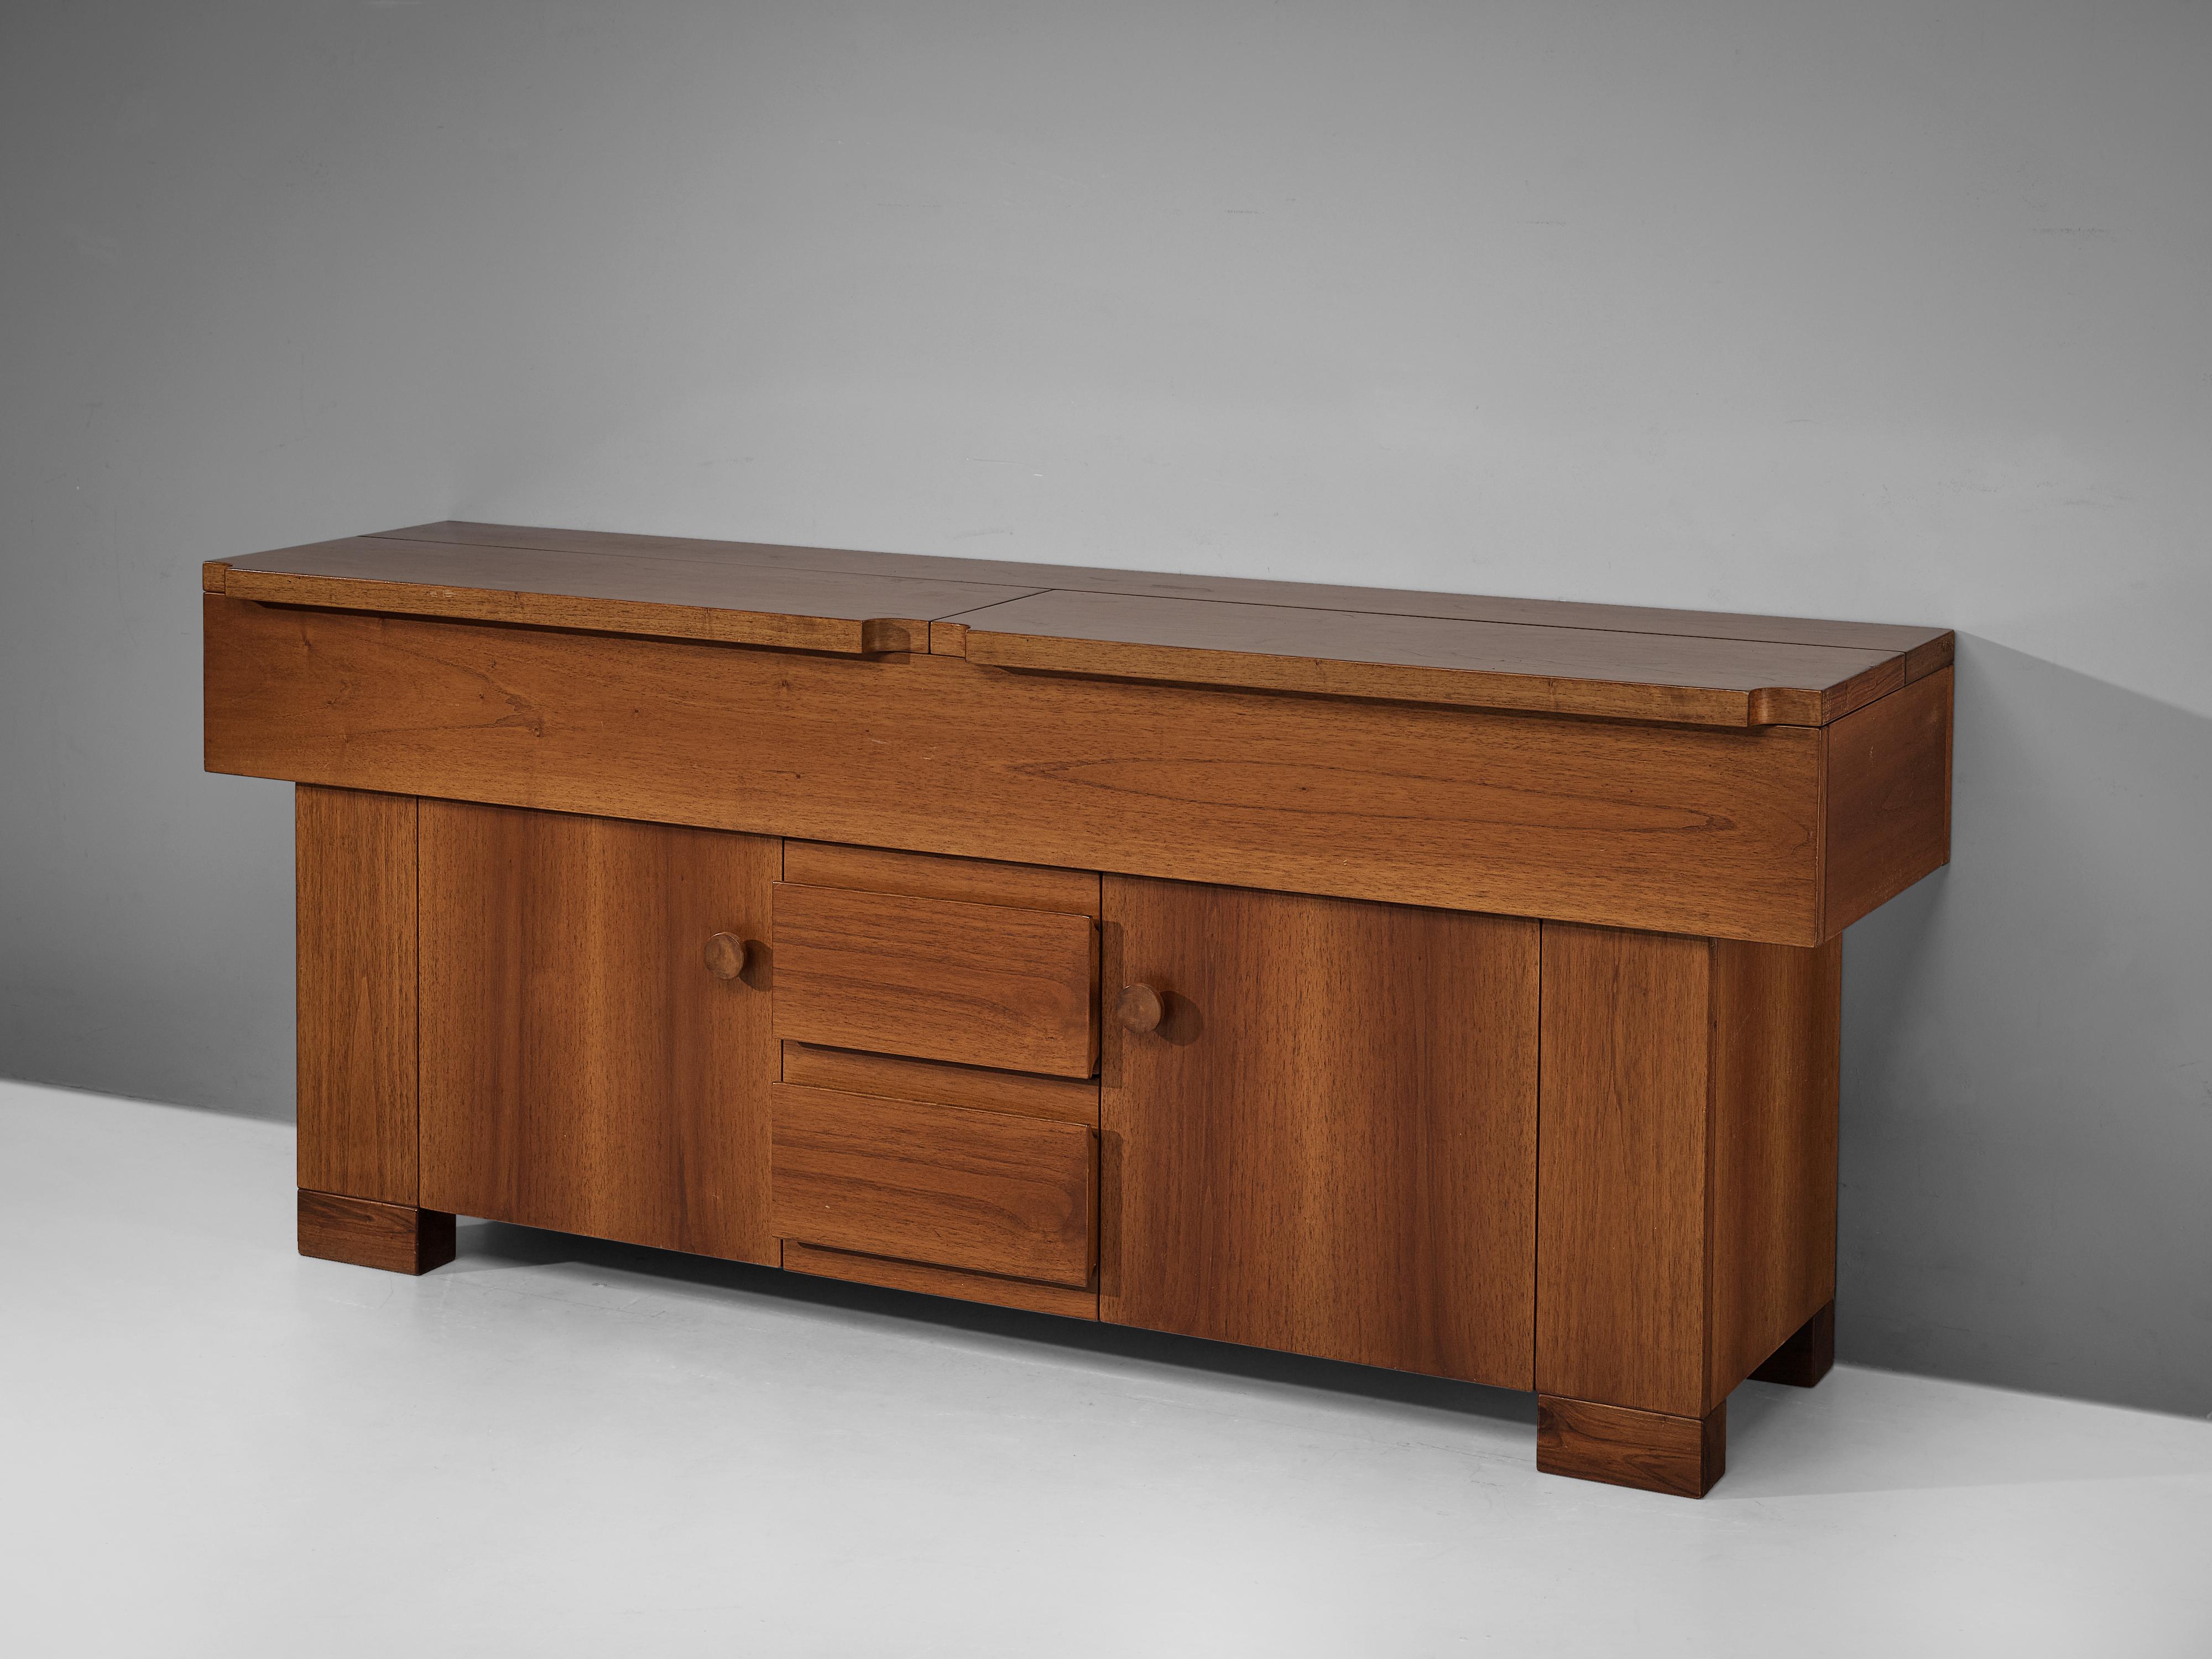 Giovanni Michelucci for Poltronova, ´Torbecchia´ sideboard, walnut, Italy, circa 1964.

This cabinet with its solid and grand appearance is designed by Italian designer Giovanni Michelucci (1891-1990) as part of the 'Torbecchia' series. The clear,